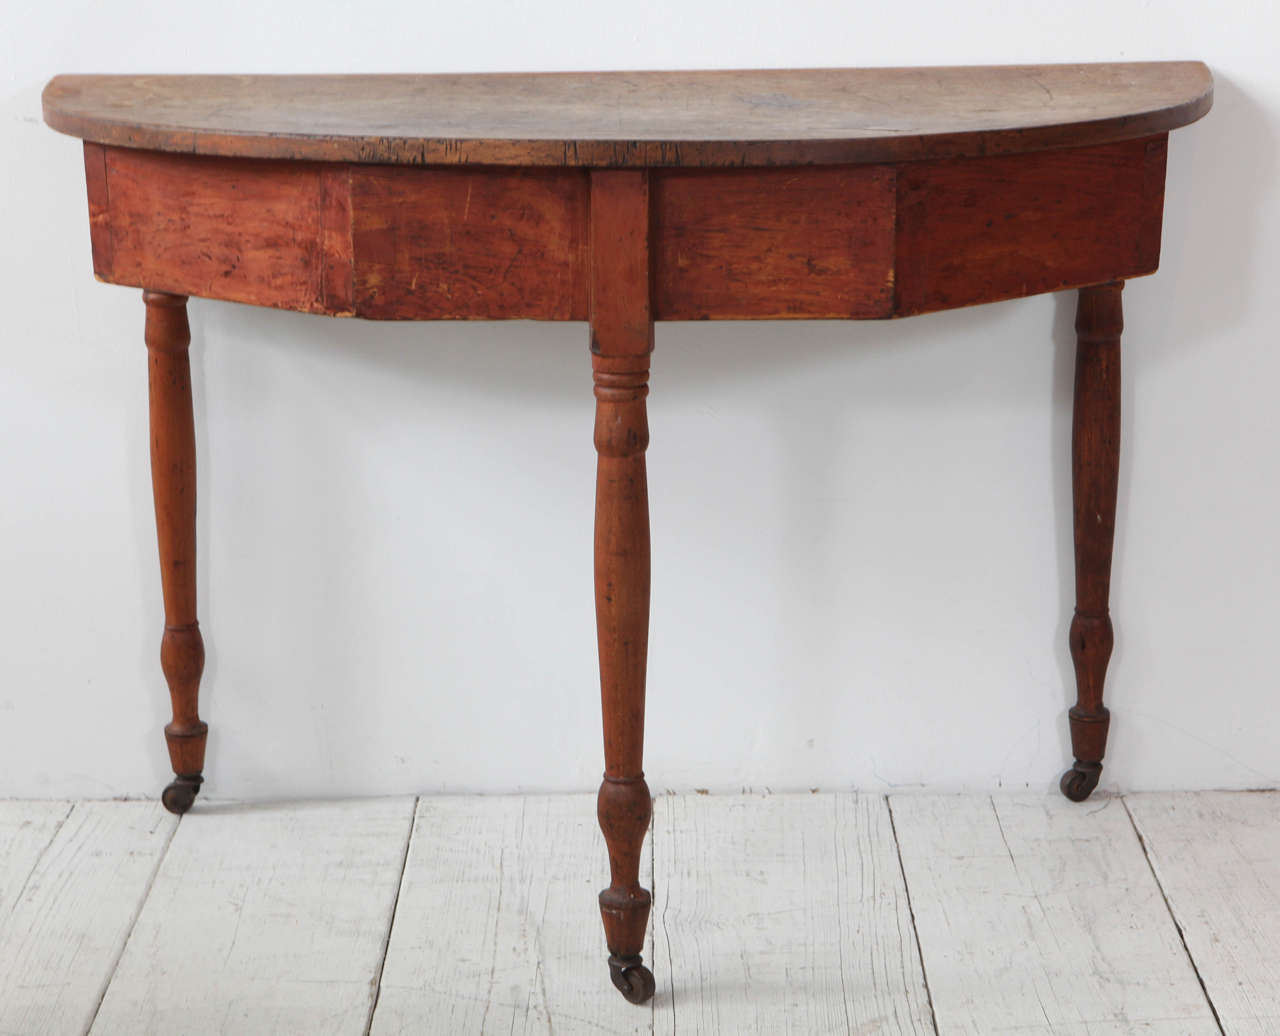 Rustic hall table / demilune / console.